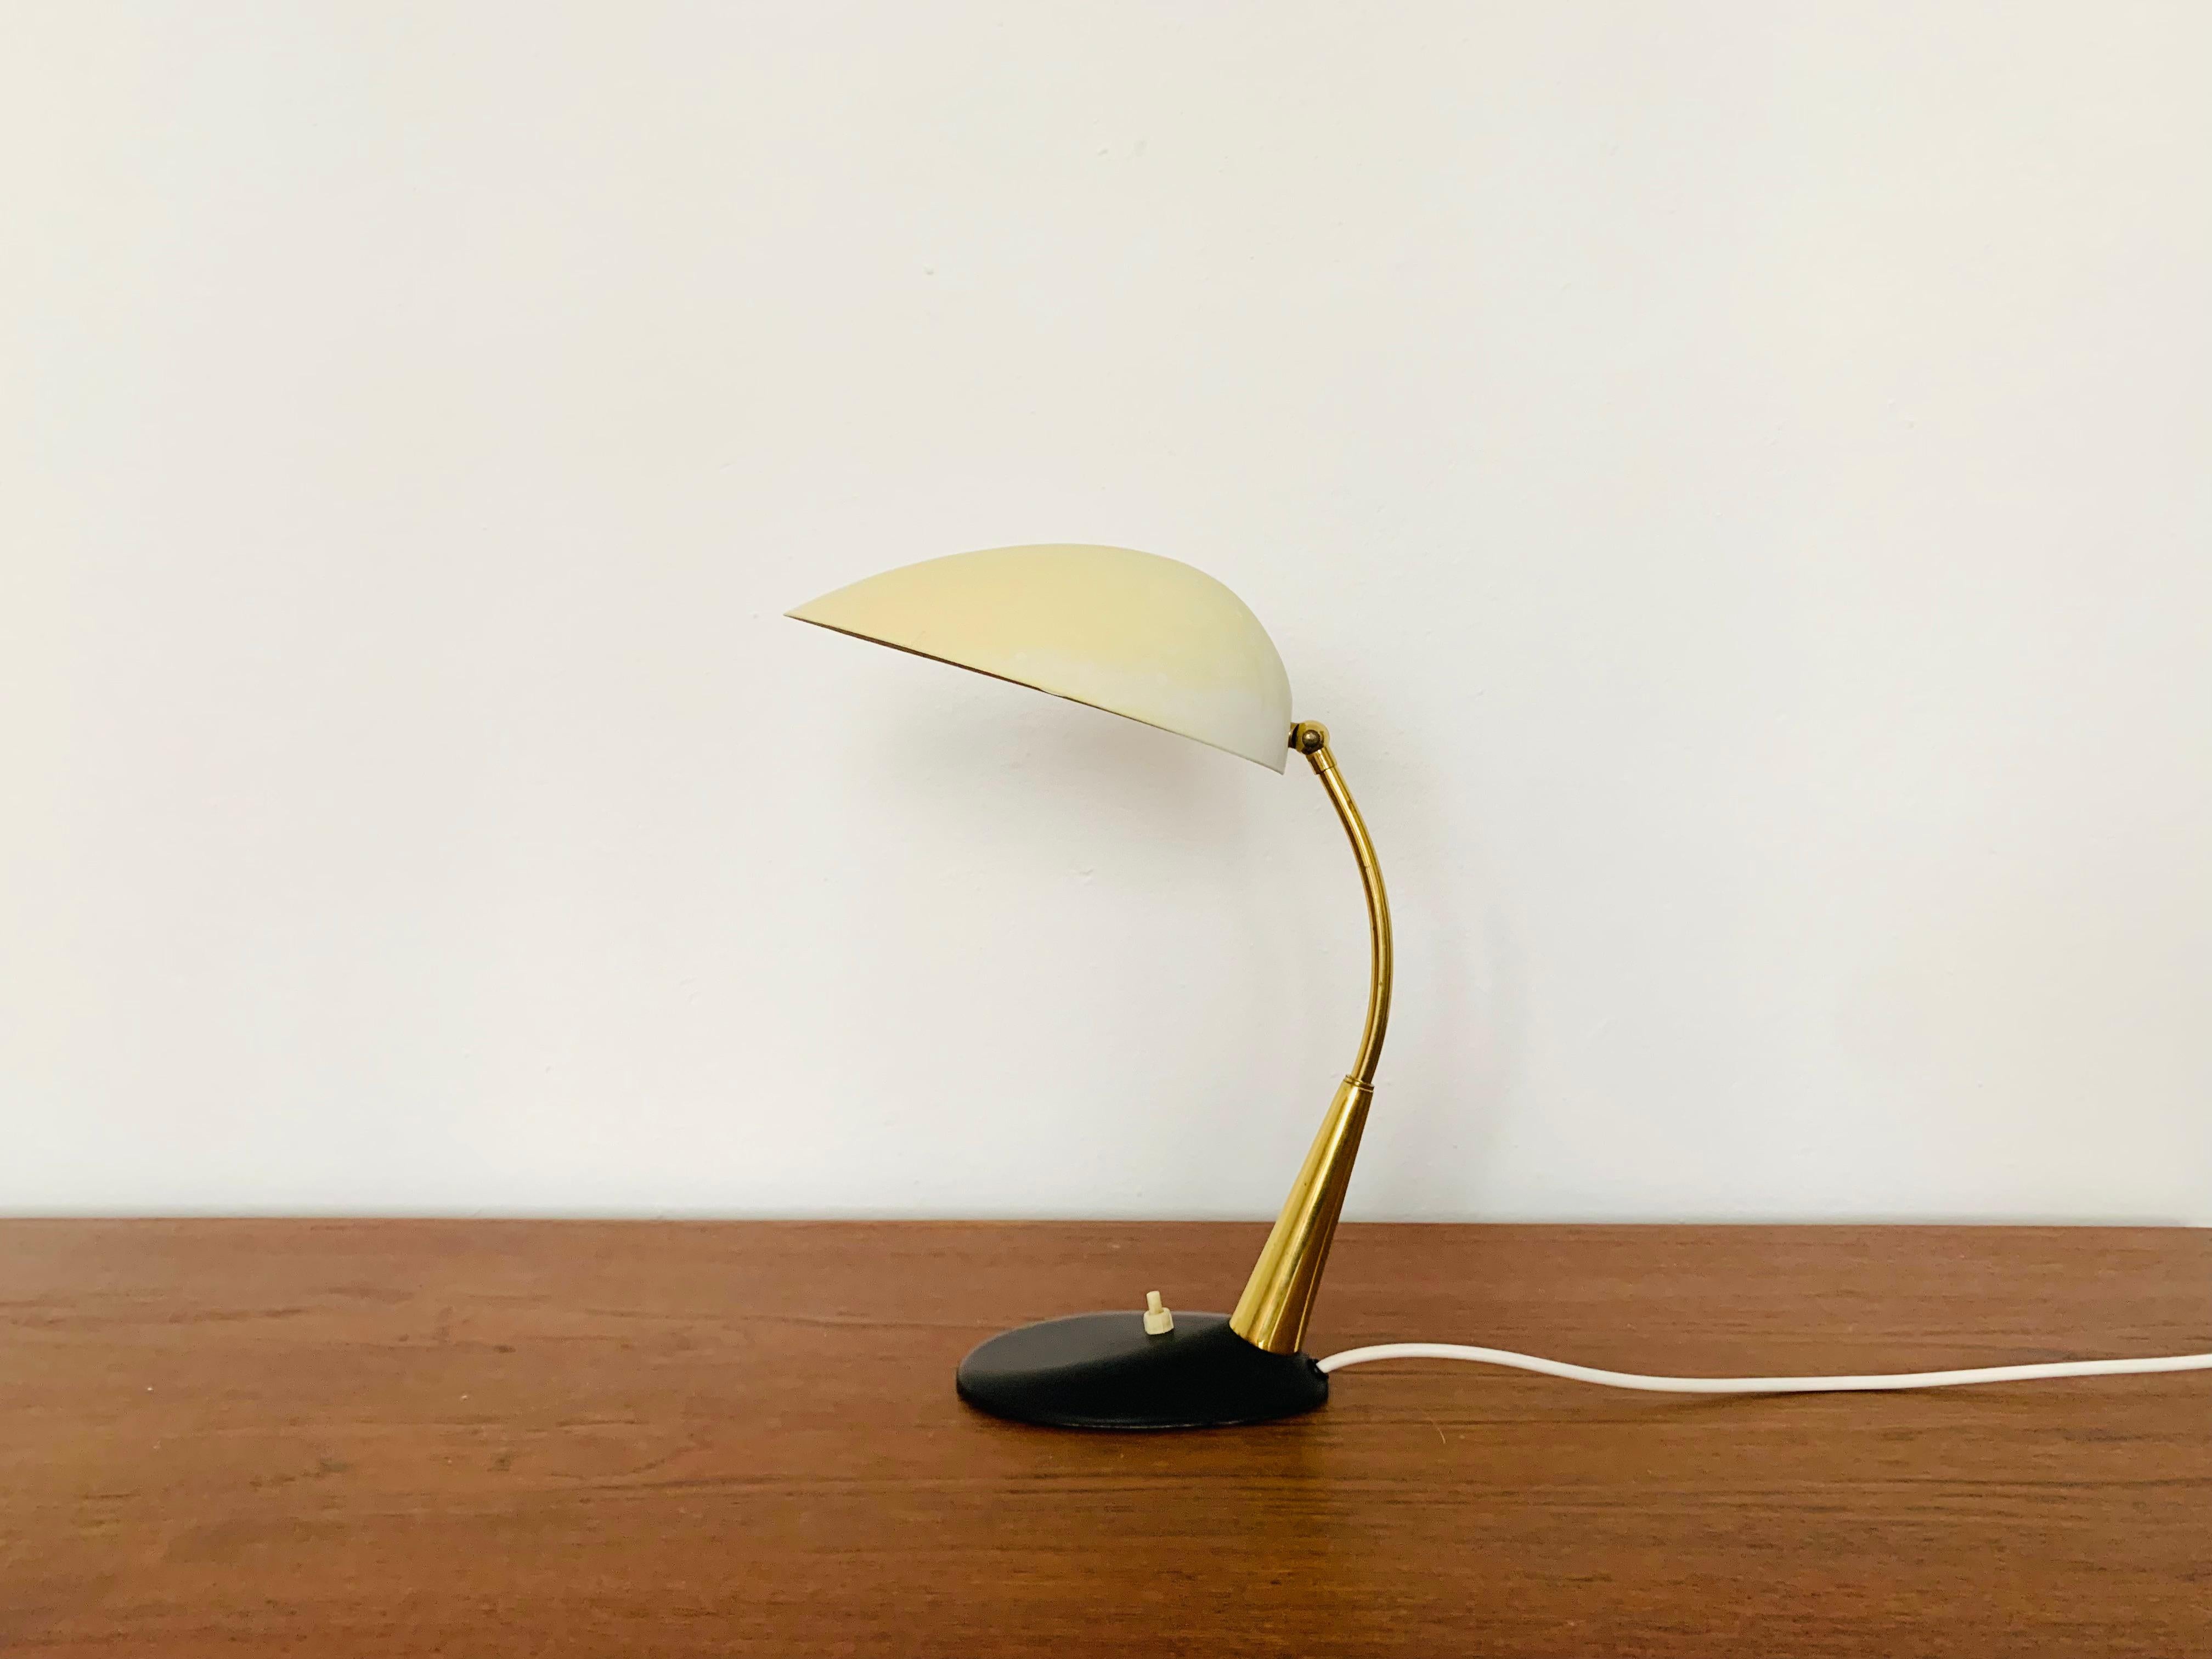 Pretty table lamp by Cosack from the 1950s.
Fantastic mid-century design.
The combination of high-quality workmanship and loving details enriches every home.

Manufacturer: Cosack

Condition:

Very good vintage condition with slight signs of wear